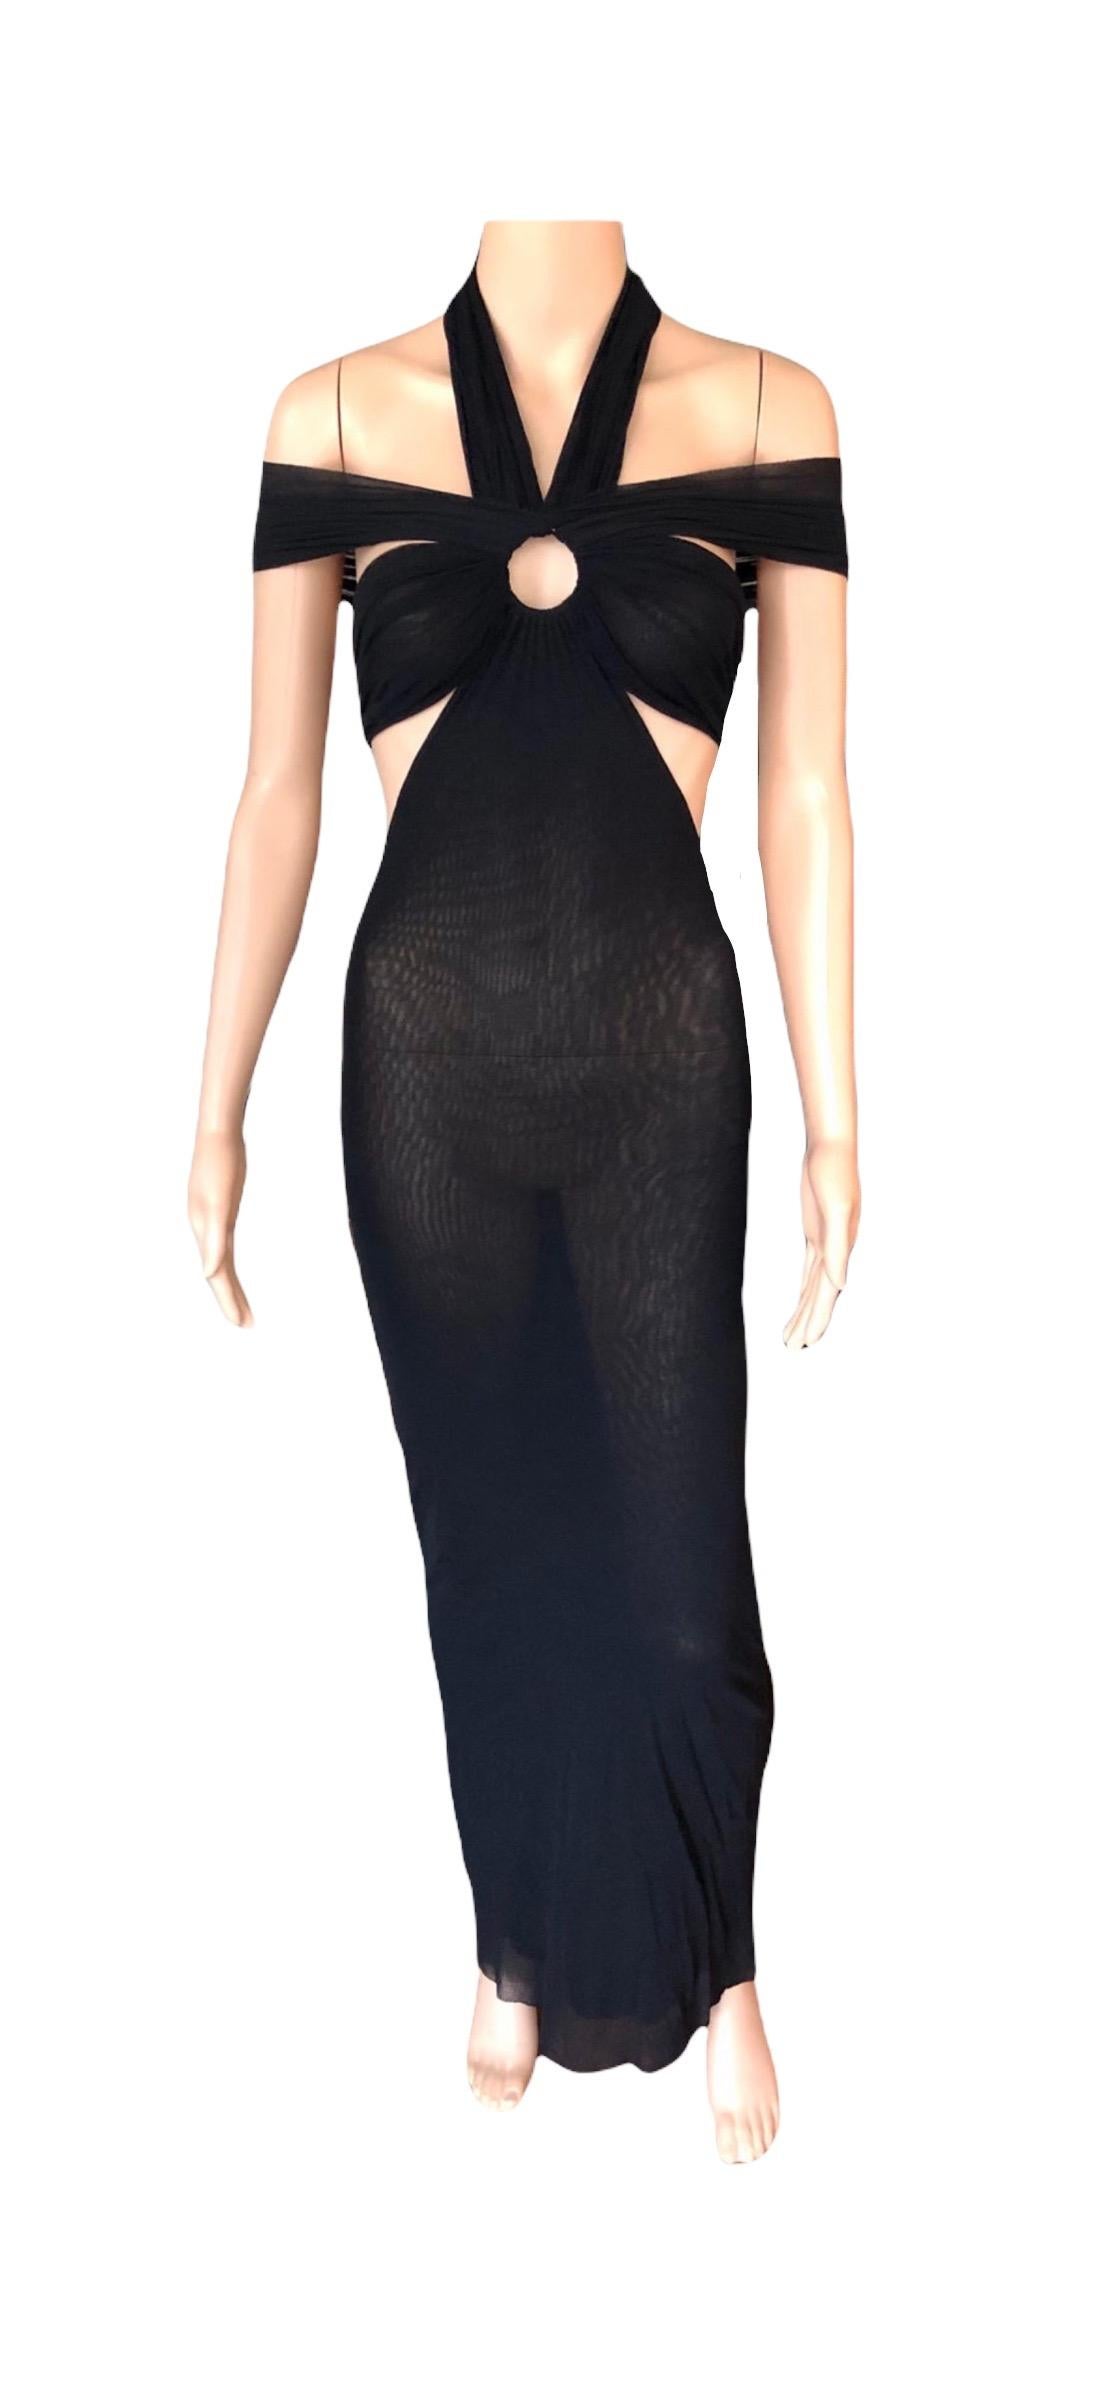 Jean Paul Gaultier Soleil S/S 1999 Cutout Sheer Mesh Bodycon Black Maxi Dress Size XS/M

Please note size tag has been removed, due to stretch in the mesh material this dress will fit size XS-M.